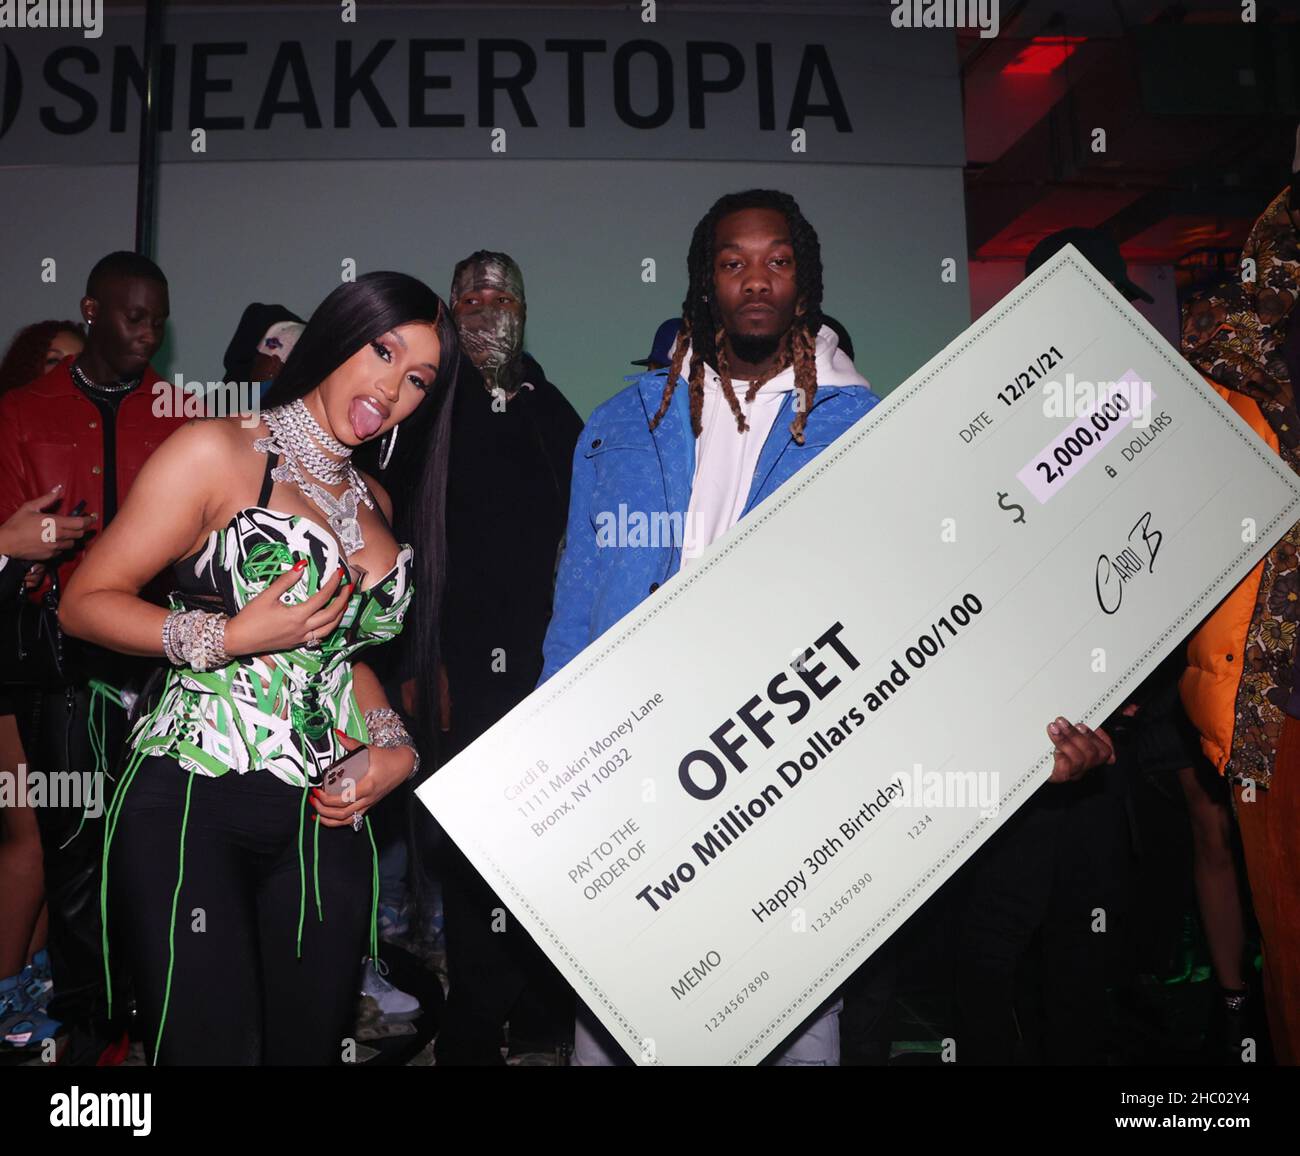 Los Angeles, Ca. 21st Dec, 2021. Cardi B presents Offset with his $2,000,000 gift at his 30th Birthday Party hosted by Cardi B at Sneakertopia LA in Los Angeles, California on December 21, 2021. Credit: Walik Goshorn/Media Punch/Alamy Live News Stock Photo